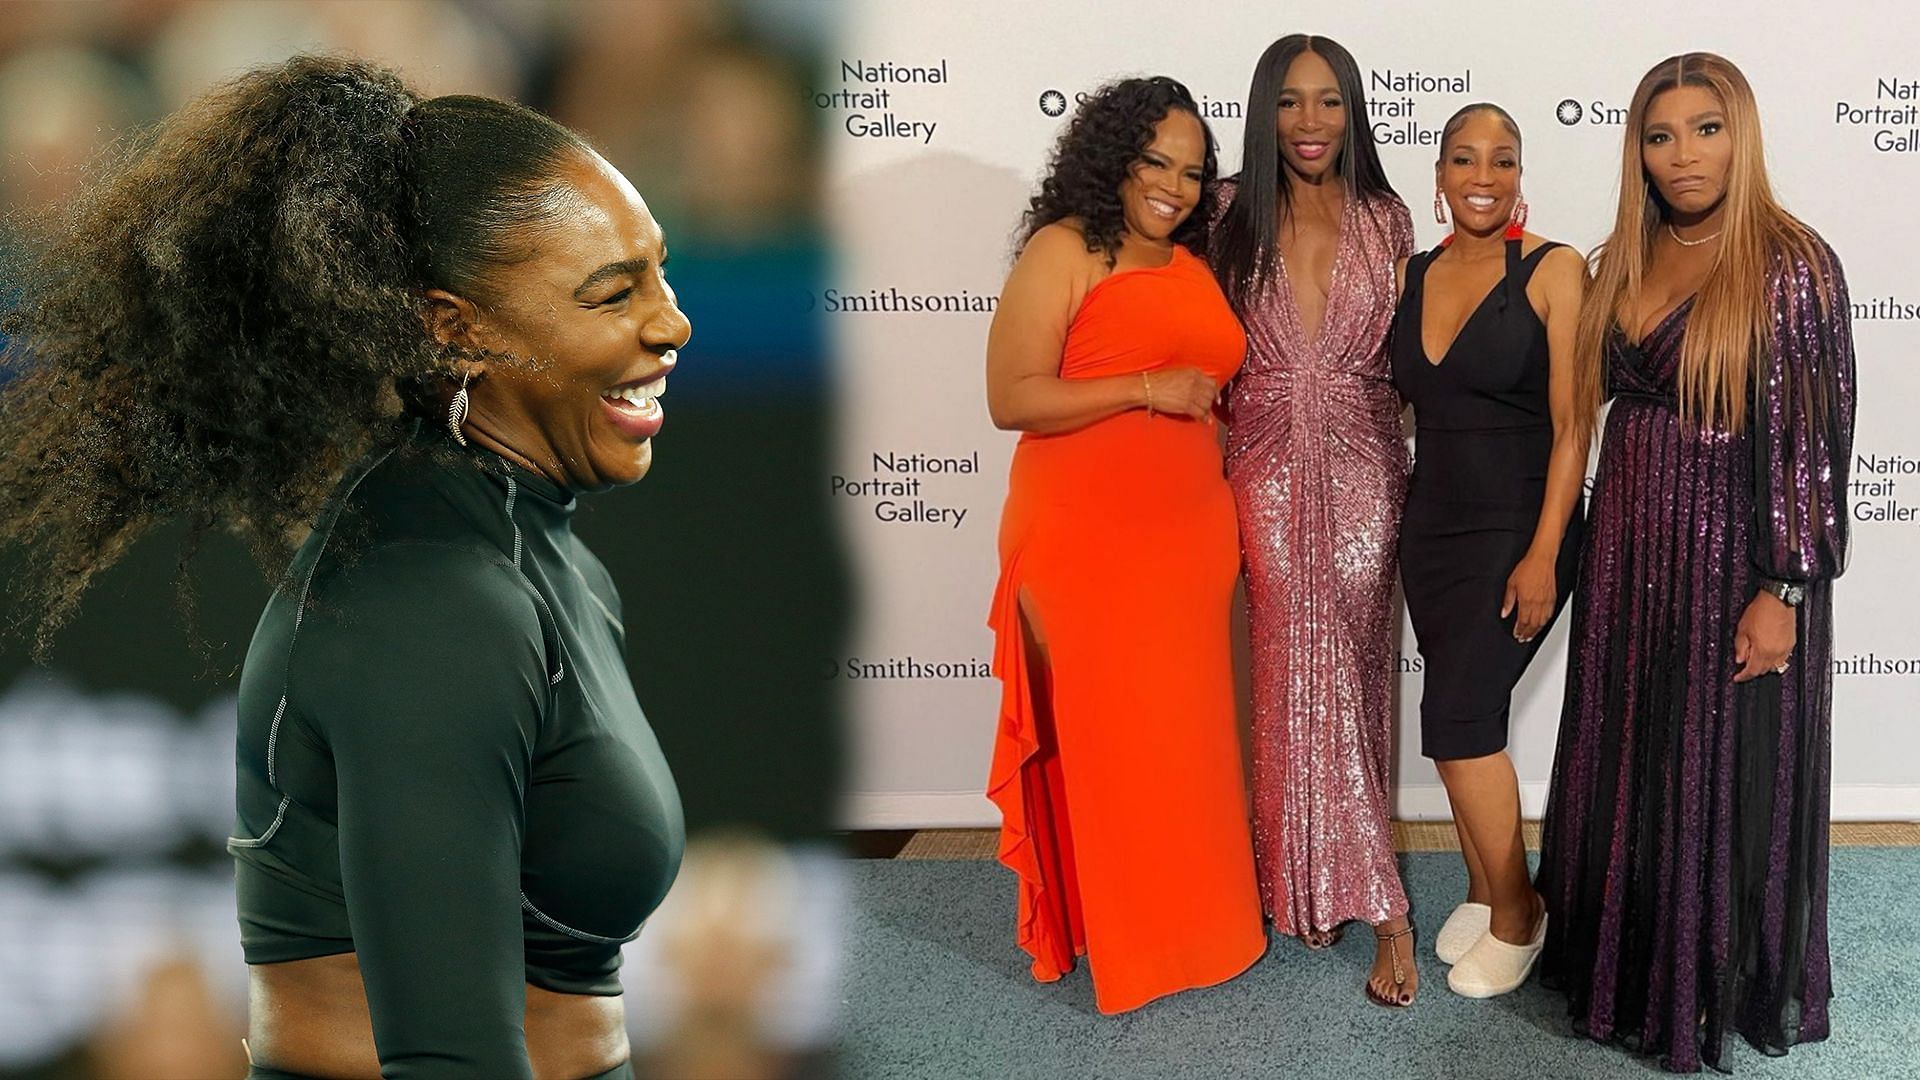 Serena Williams shares pictures with her 3 sisters from the National Portrait Gallery event